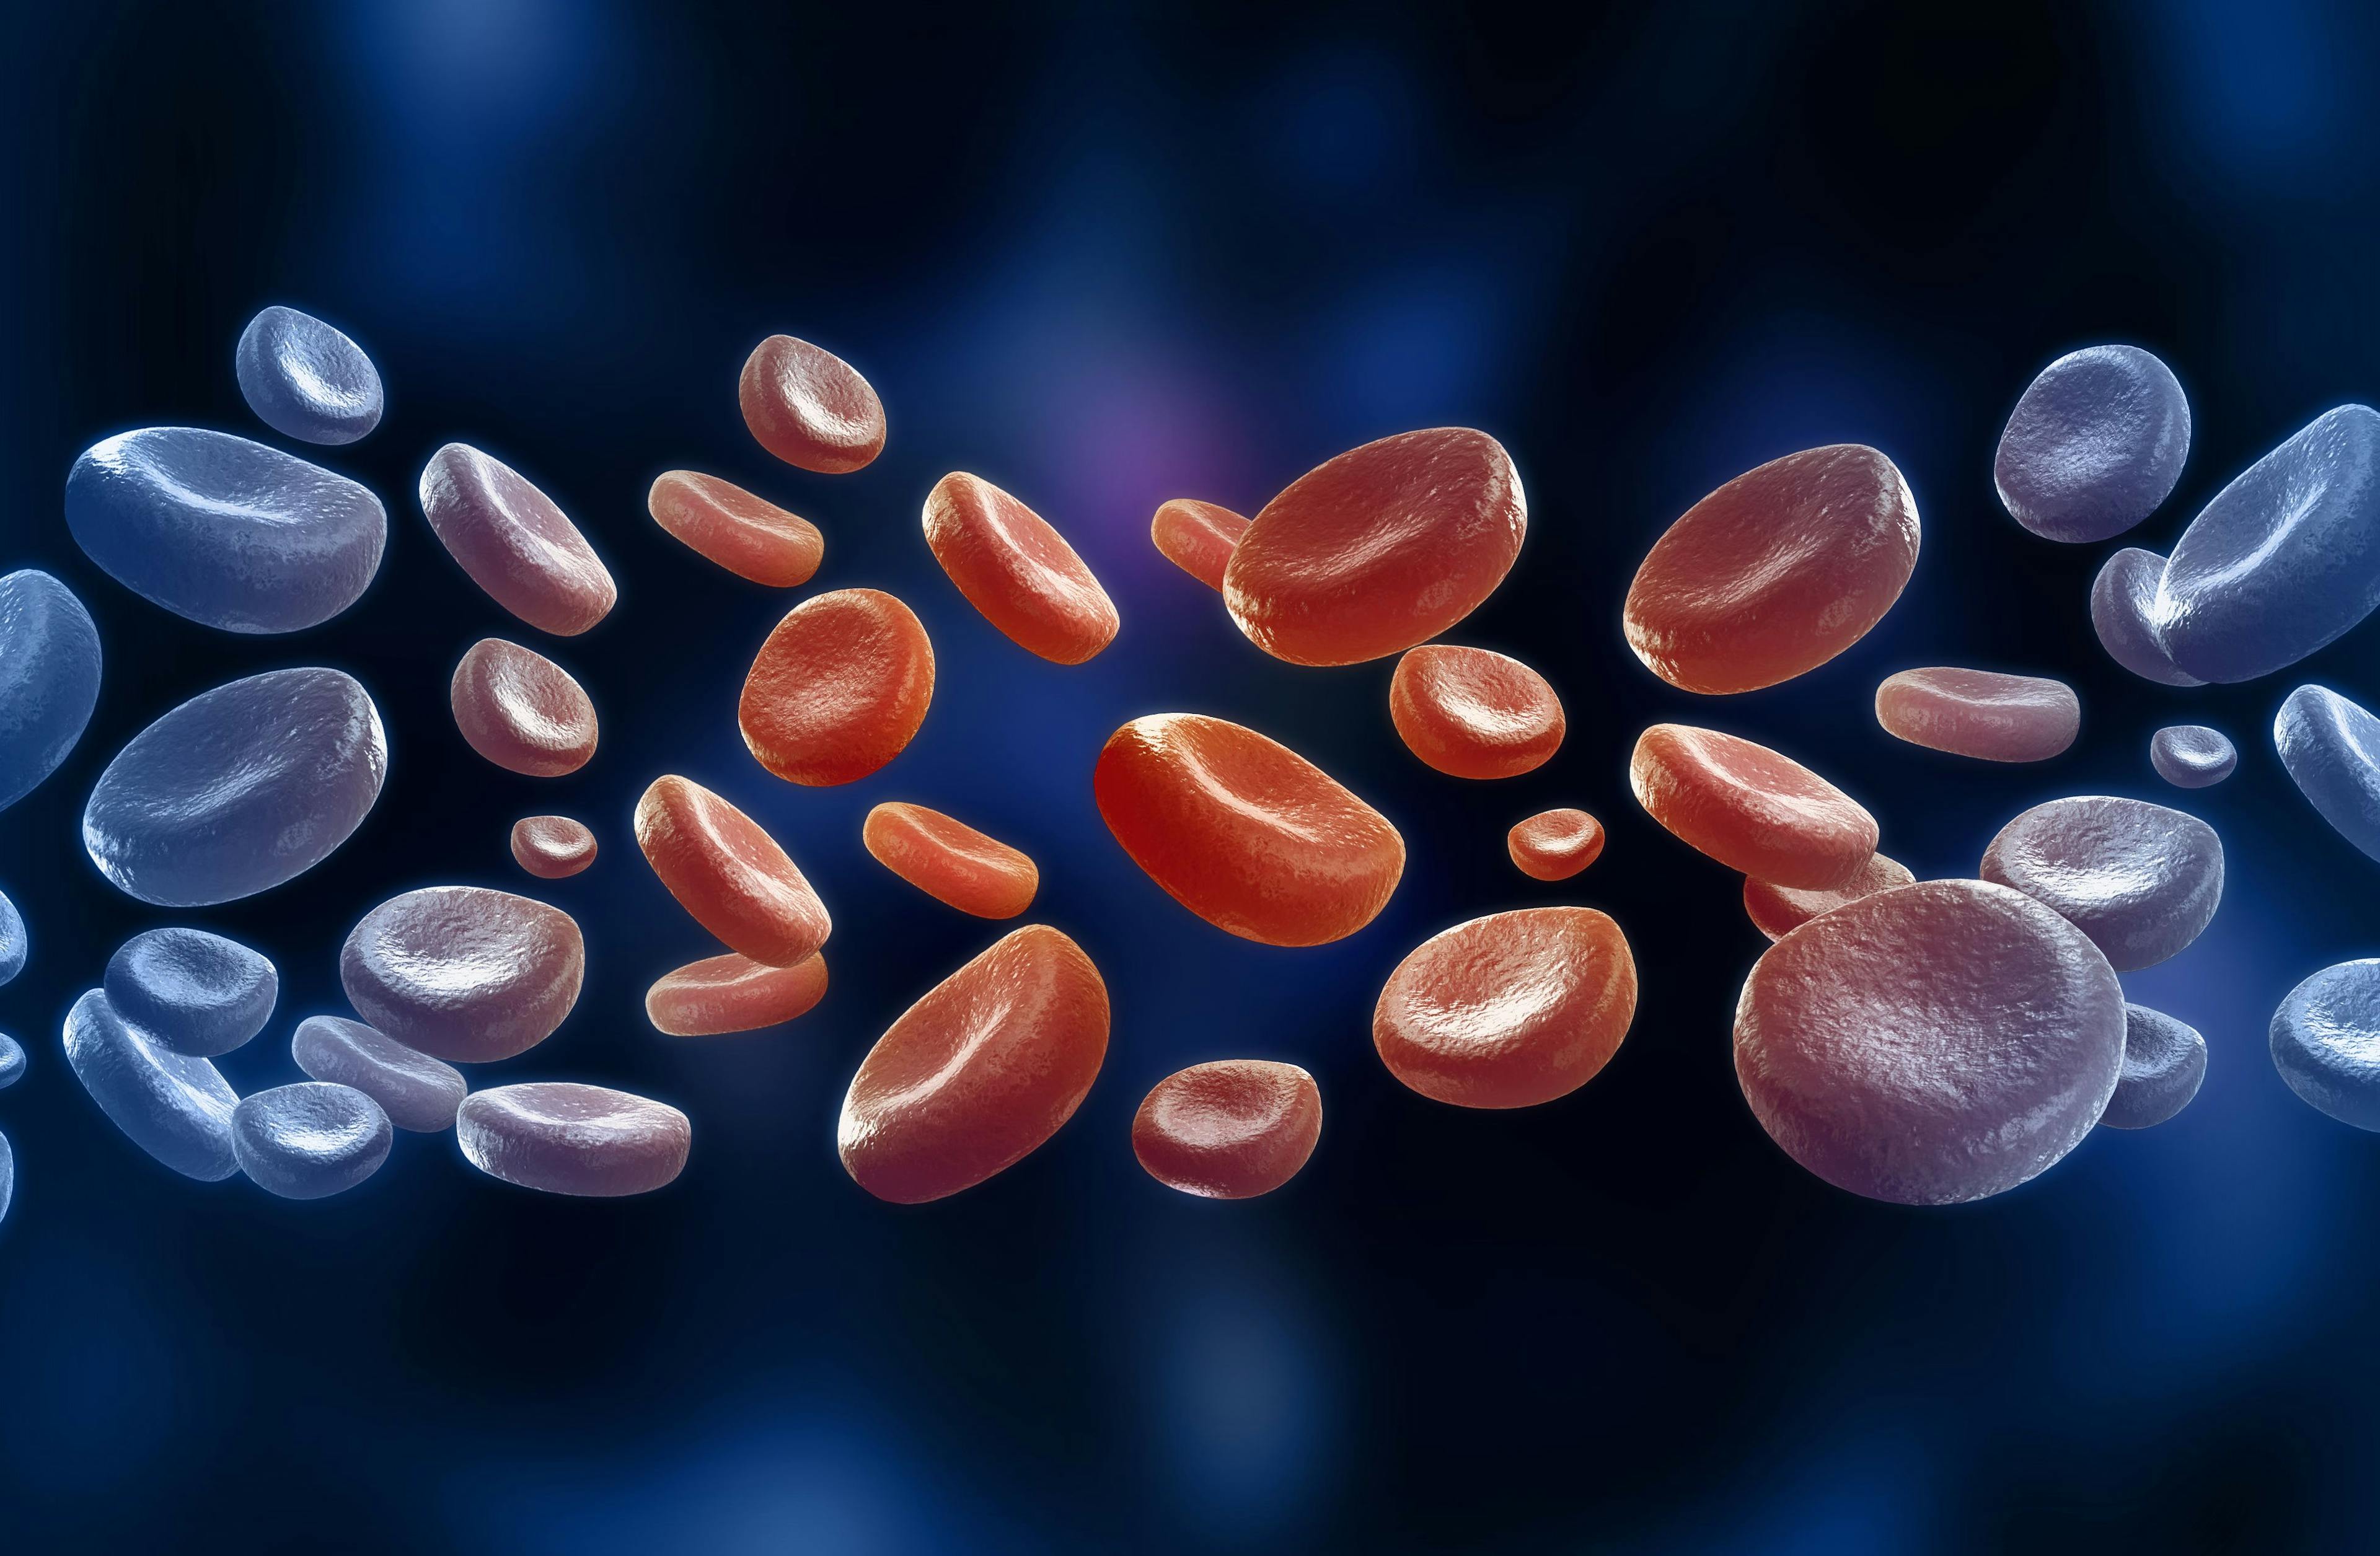 Study Explores Risk Factors for Therapy-Related MDS, AML Following HCT for Multiple Myeloma